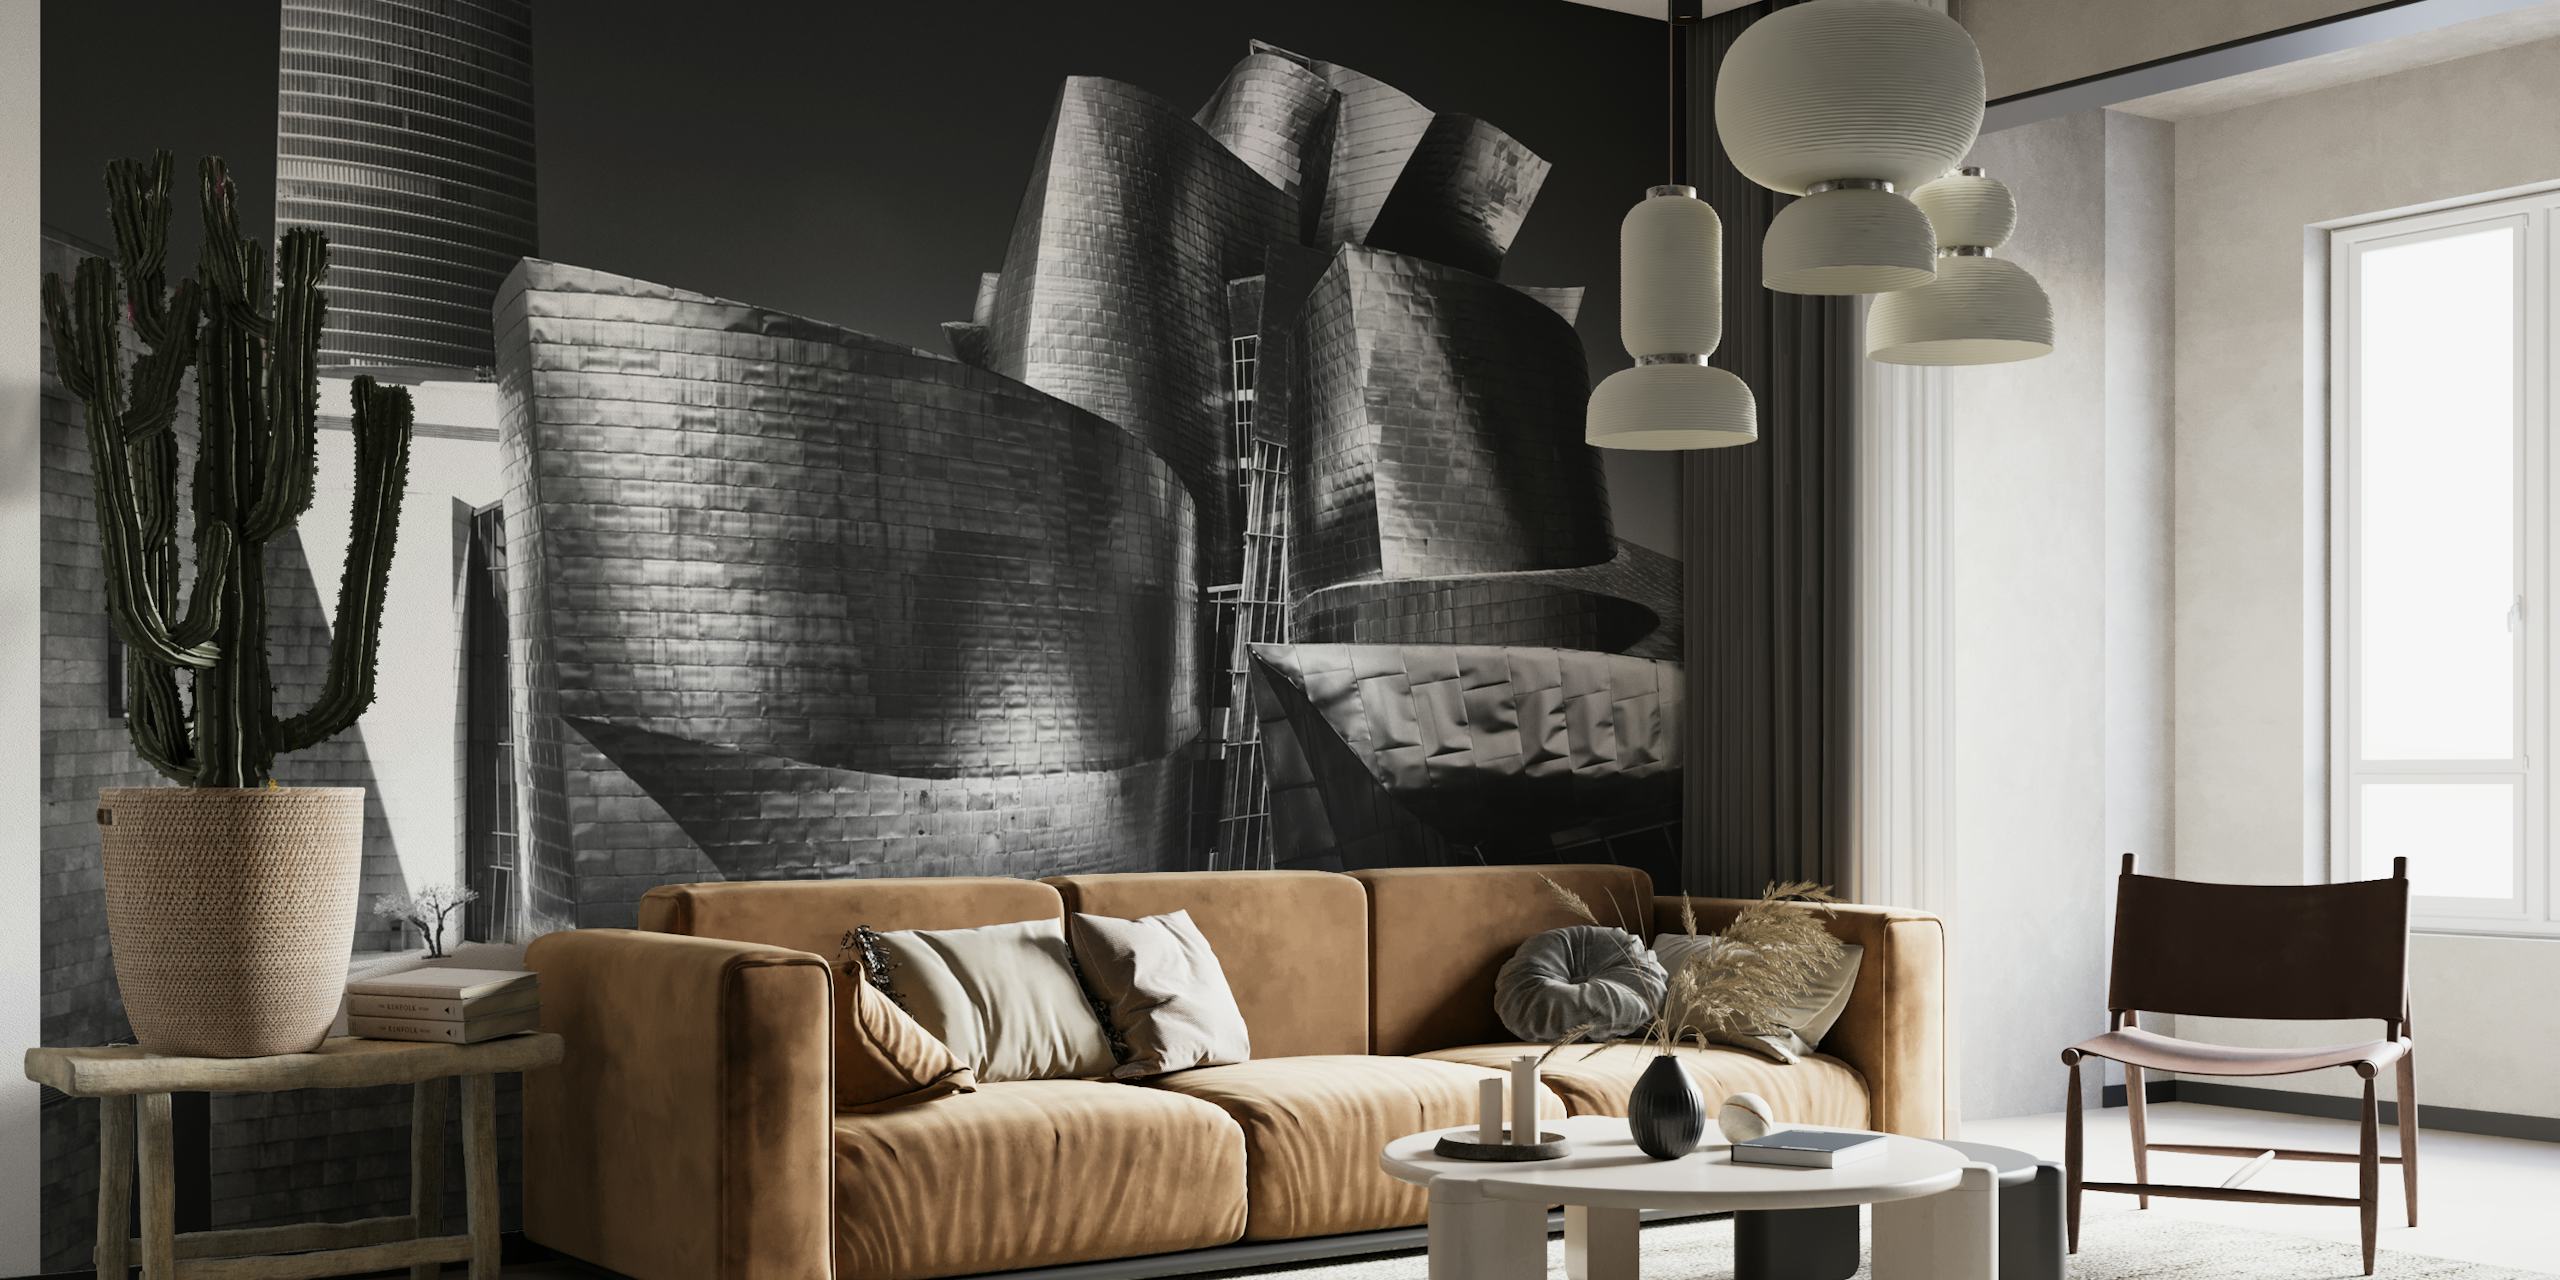 Abstract monochrome wall mural with a surreal landscape of a tree and geometric structures from happywall.com